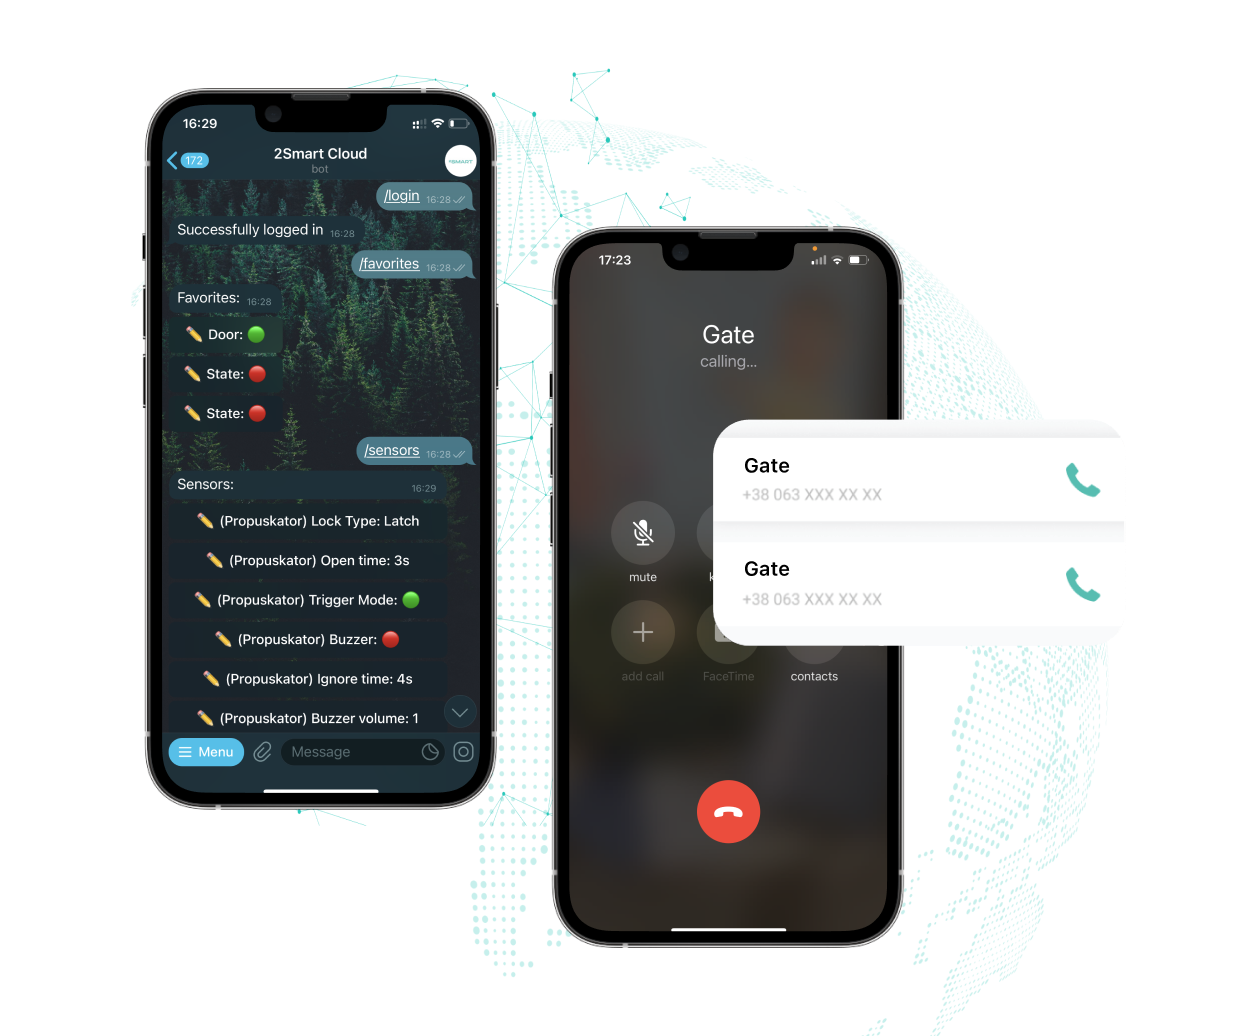 Control devices via messengers and use phone calls to access smart features without an internet connection.